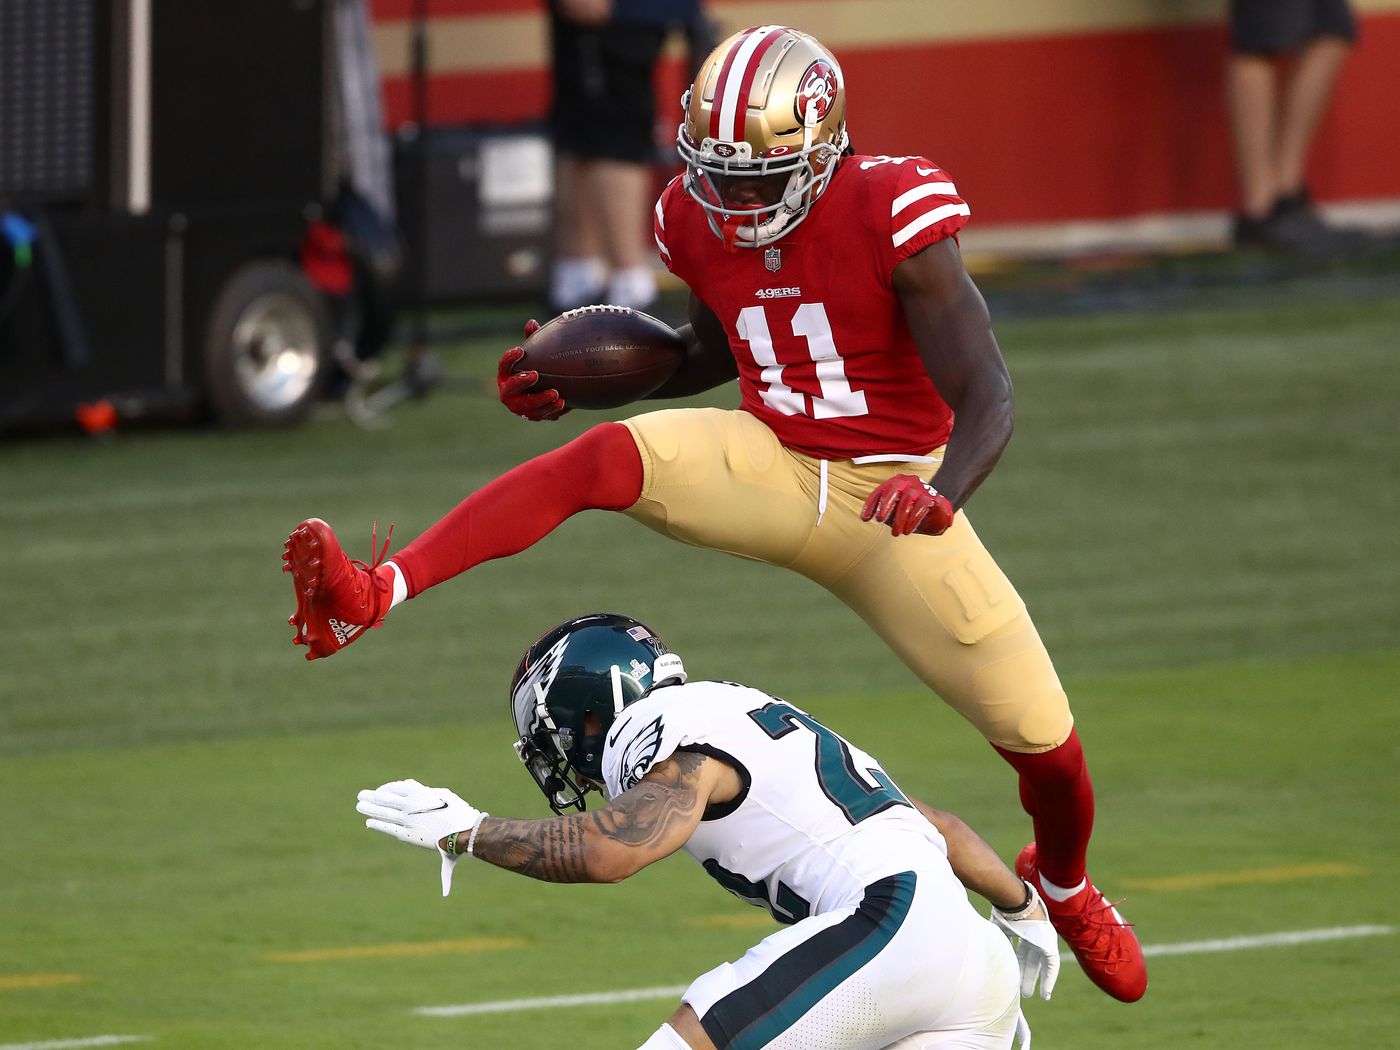  Ravens Eyeing Big Move How Trading for 49ers' Star Brandon Aiyuk Could Boost Their Super Bowl Chances-